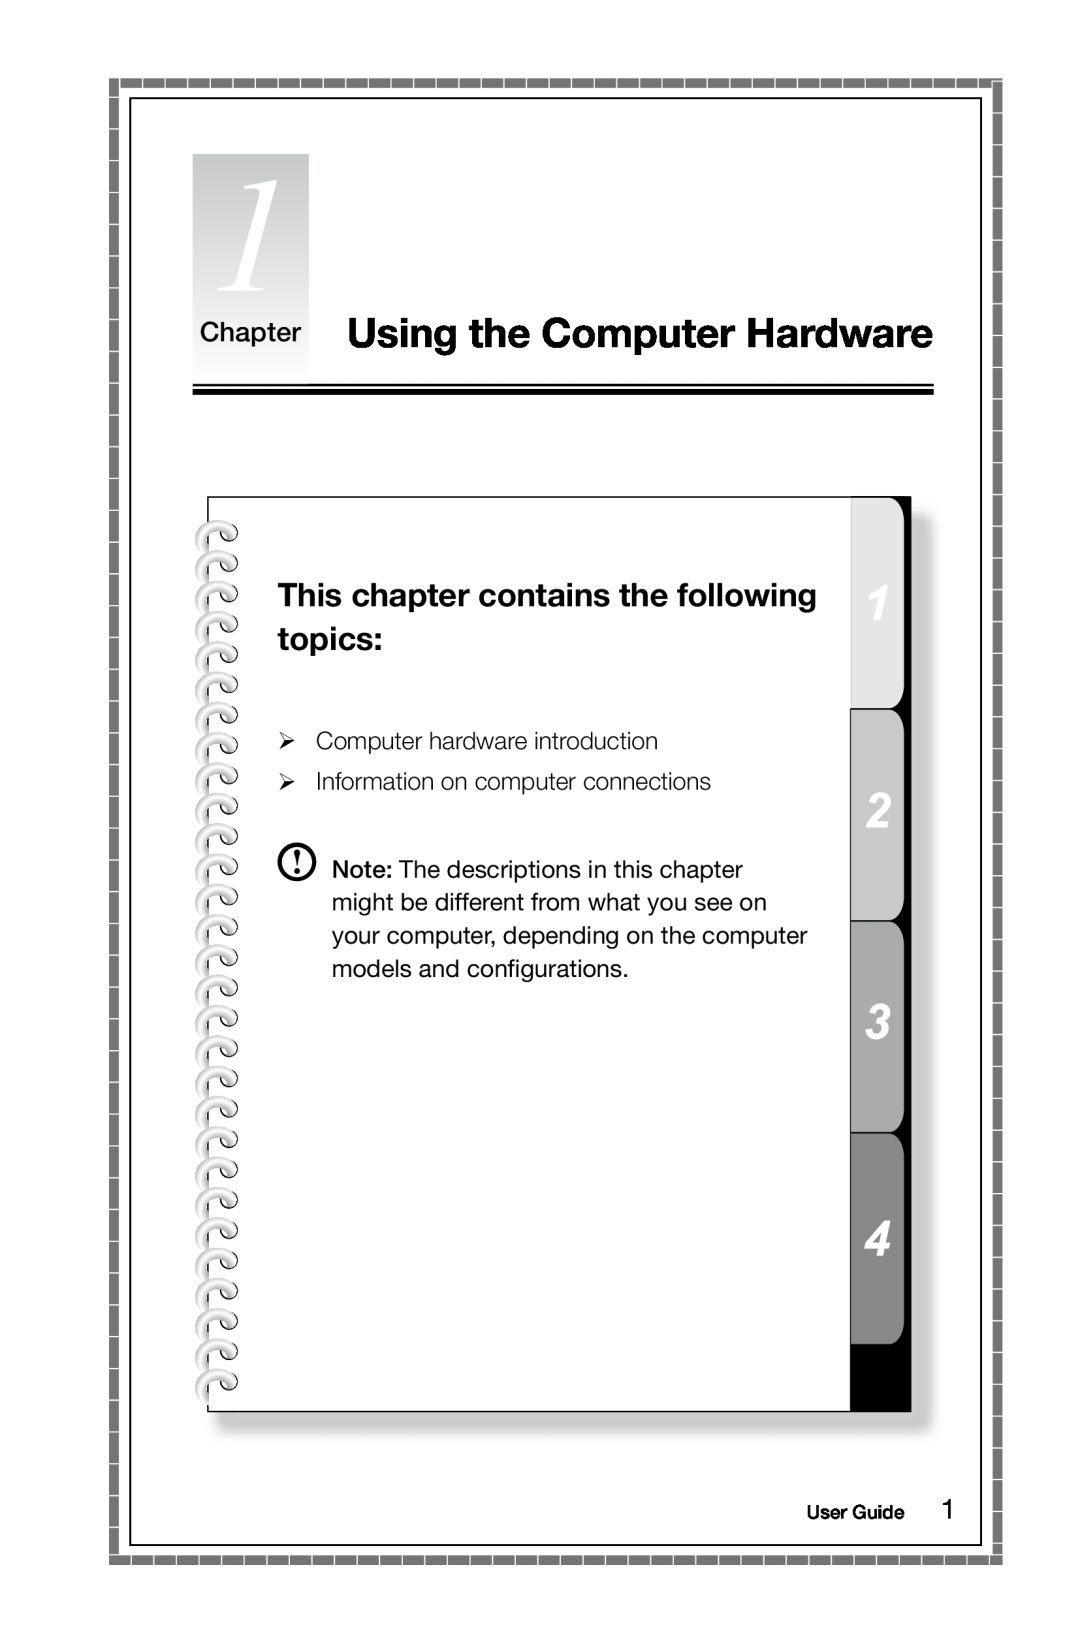 Lenovo H5S manual Chapter Using the Computer Hardware, This chapter contains the following topics, User Guide 